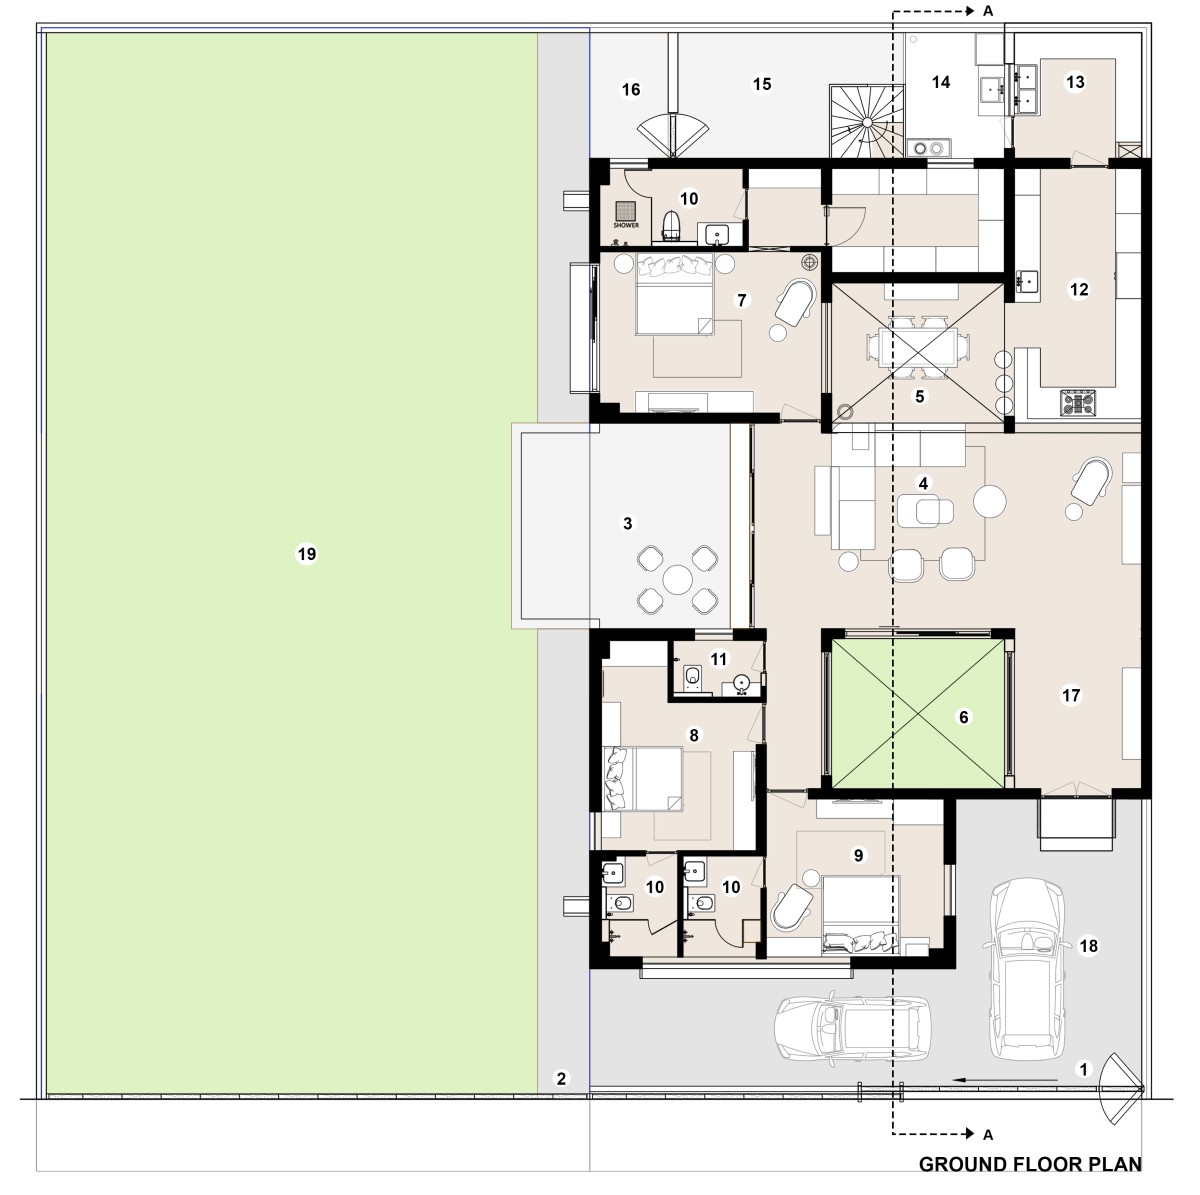 Ground Floor Plan of The Brick House by Studio Ardete